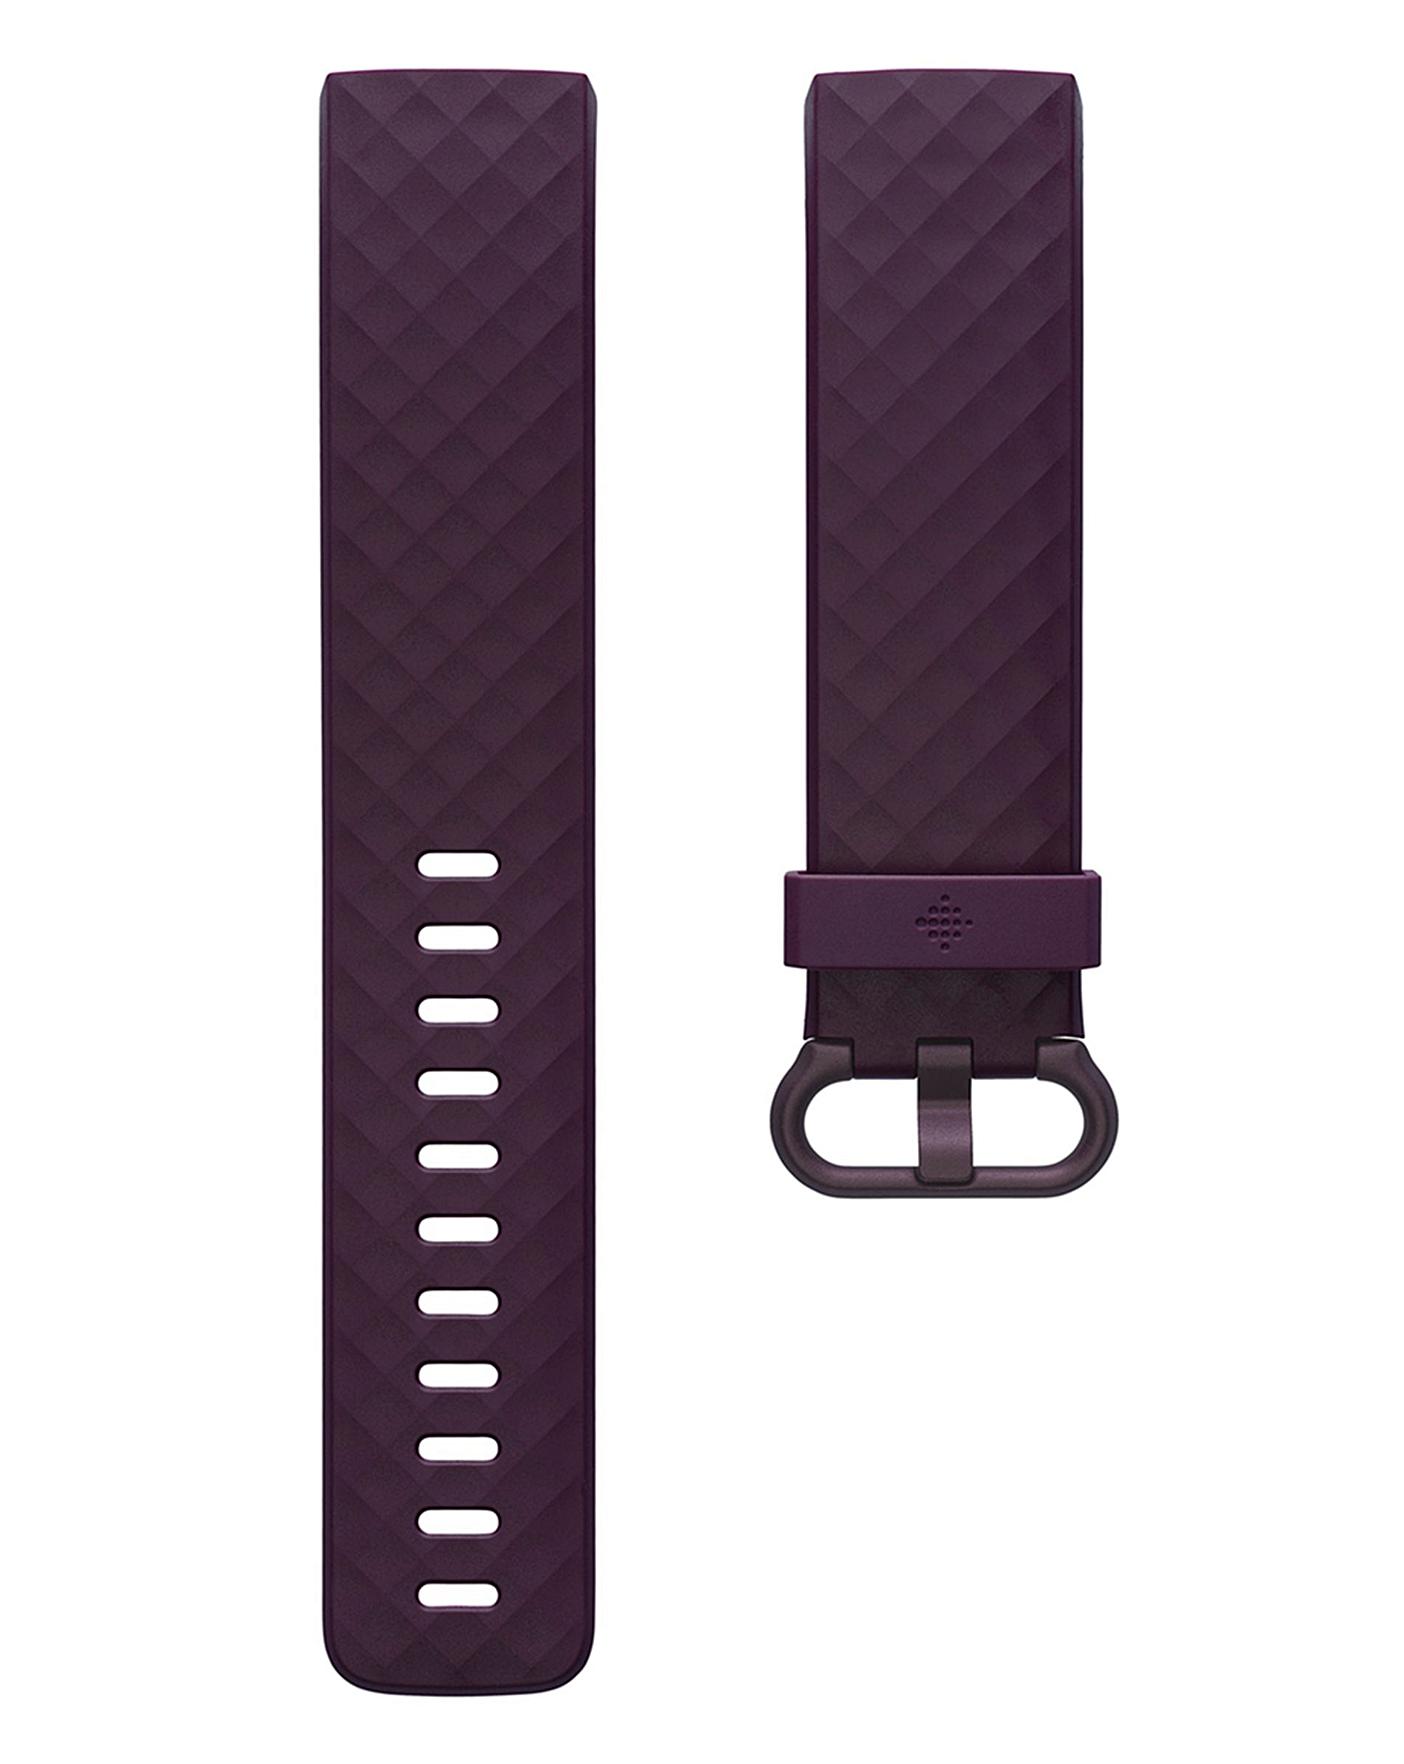 fitbit charge 4 woven band rosewood